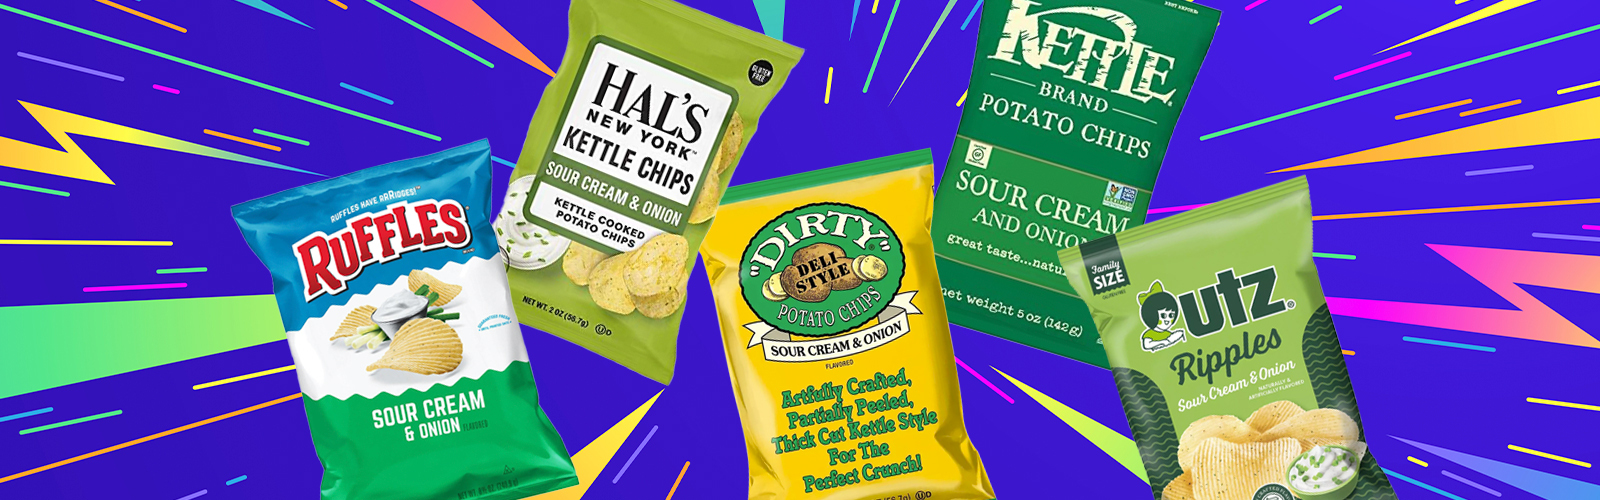 Sour Cream & Onion - North Fork Chips - The Most Delicious Kettle